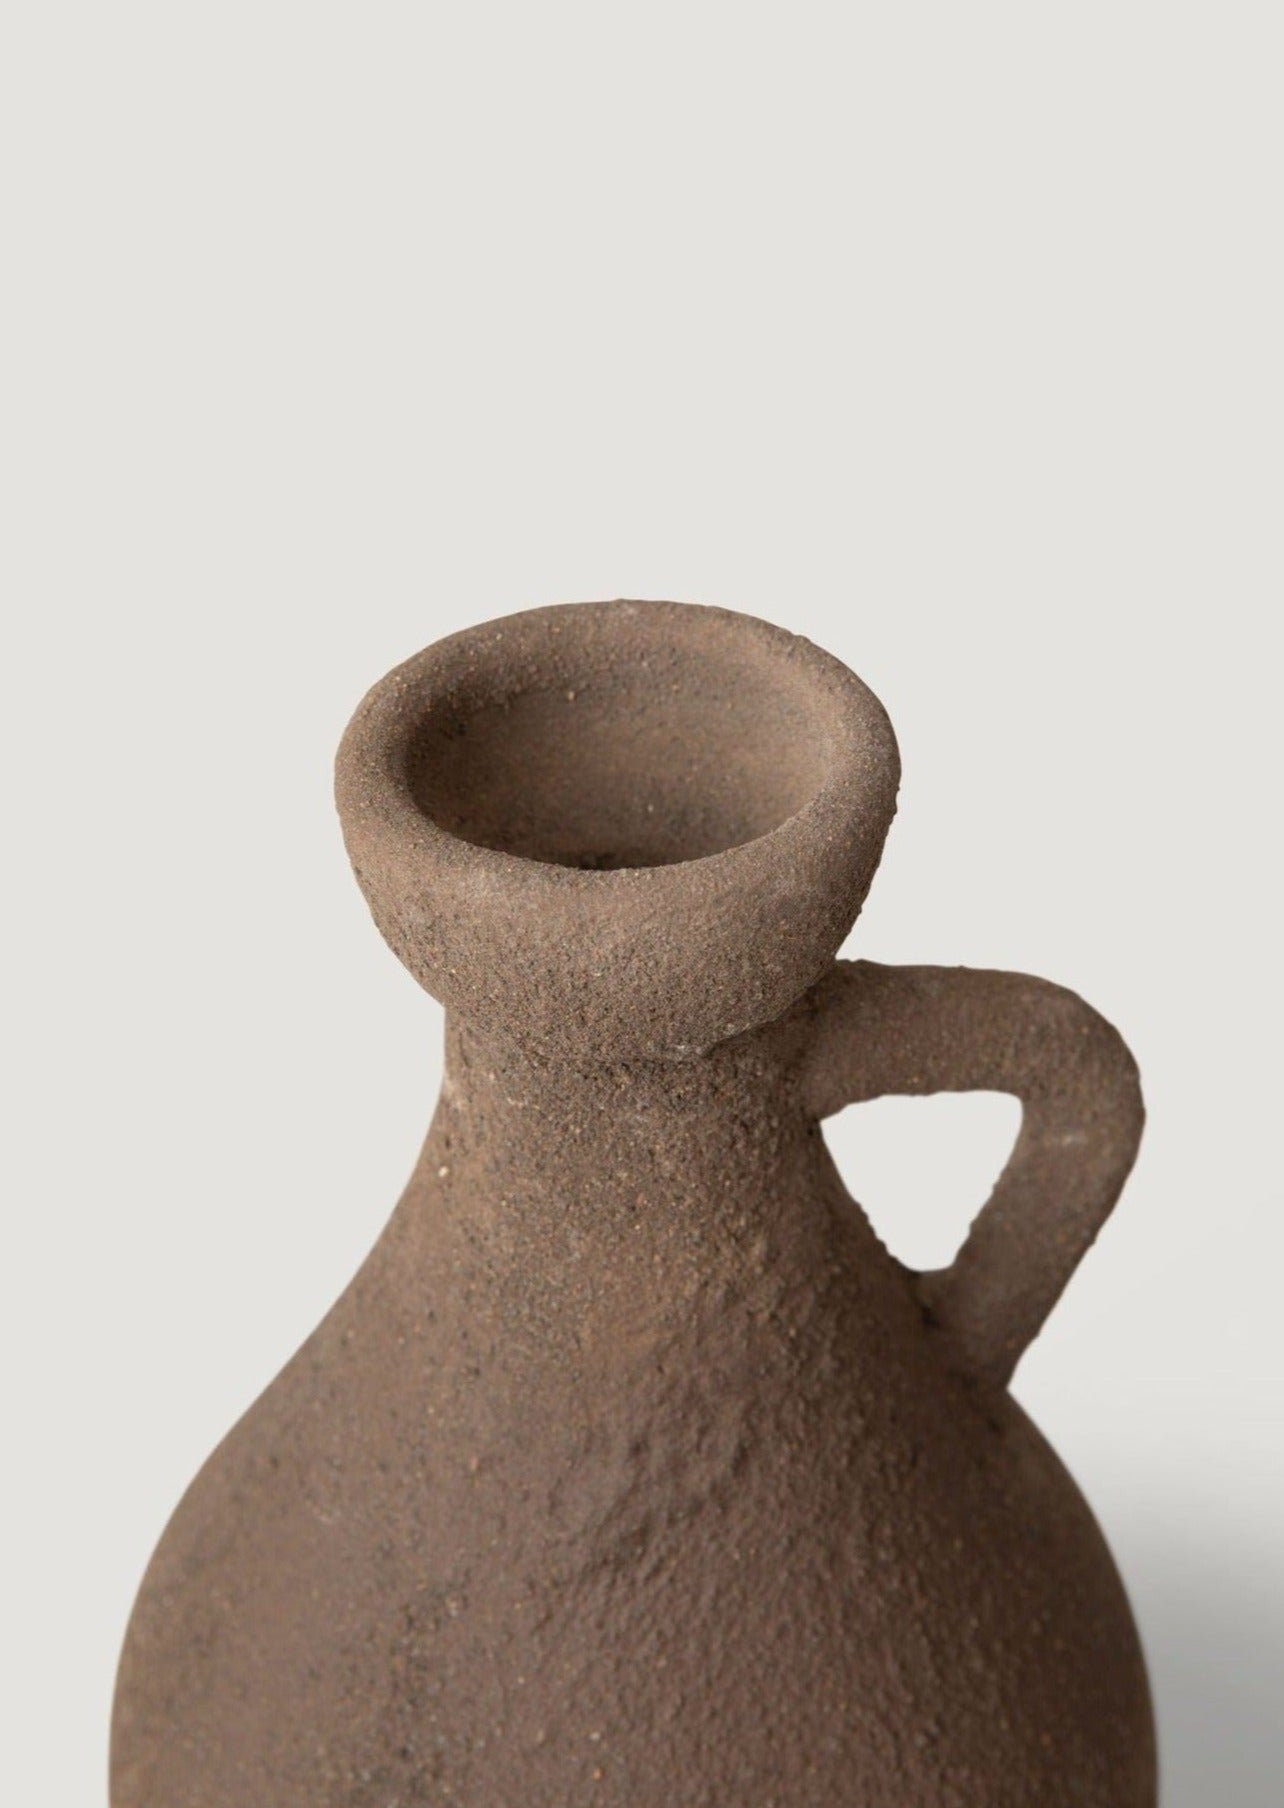 Handcrafted Clay Amanda Vase in Brown Finish